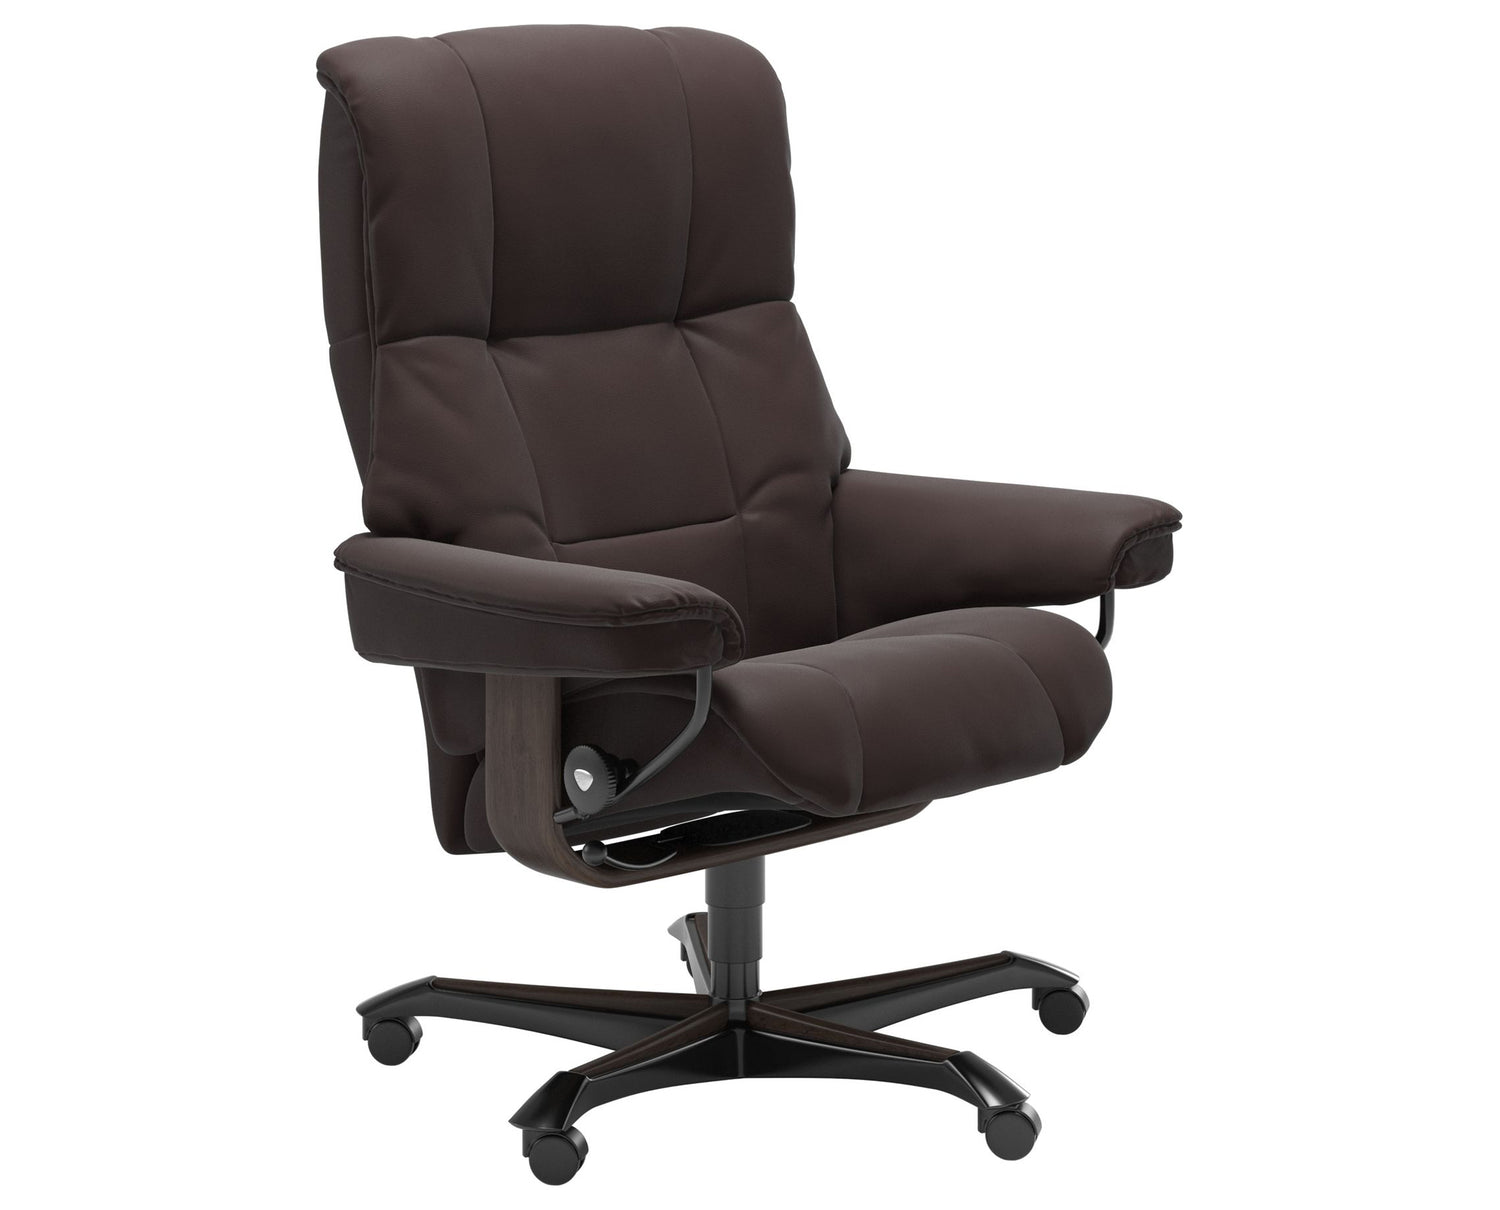 Paloma Leather Chocolate M & Wenge Base | Stressless Mayfair Home Office Chair | Valley Ridge Furniture